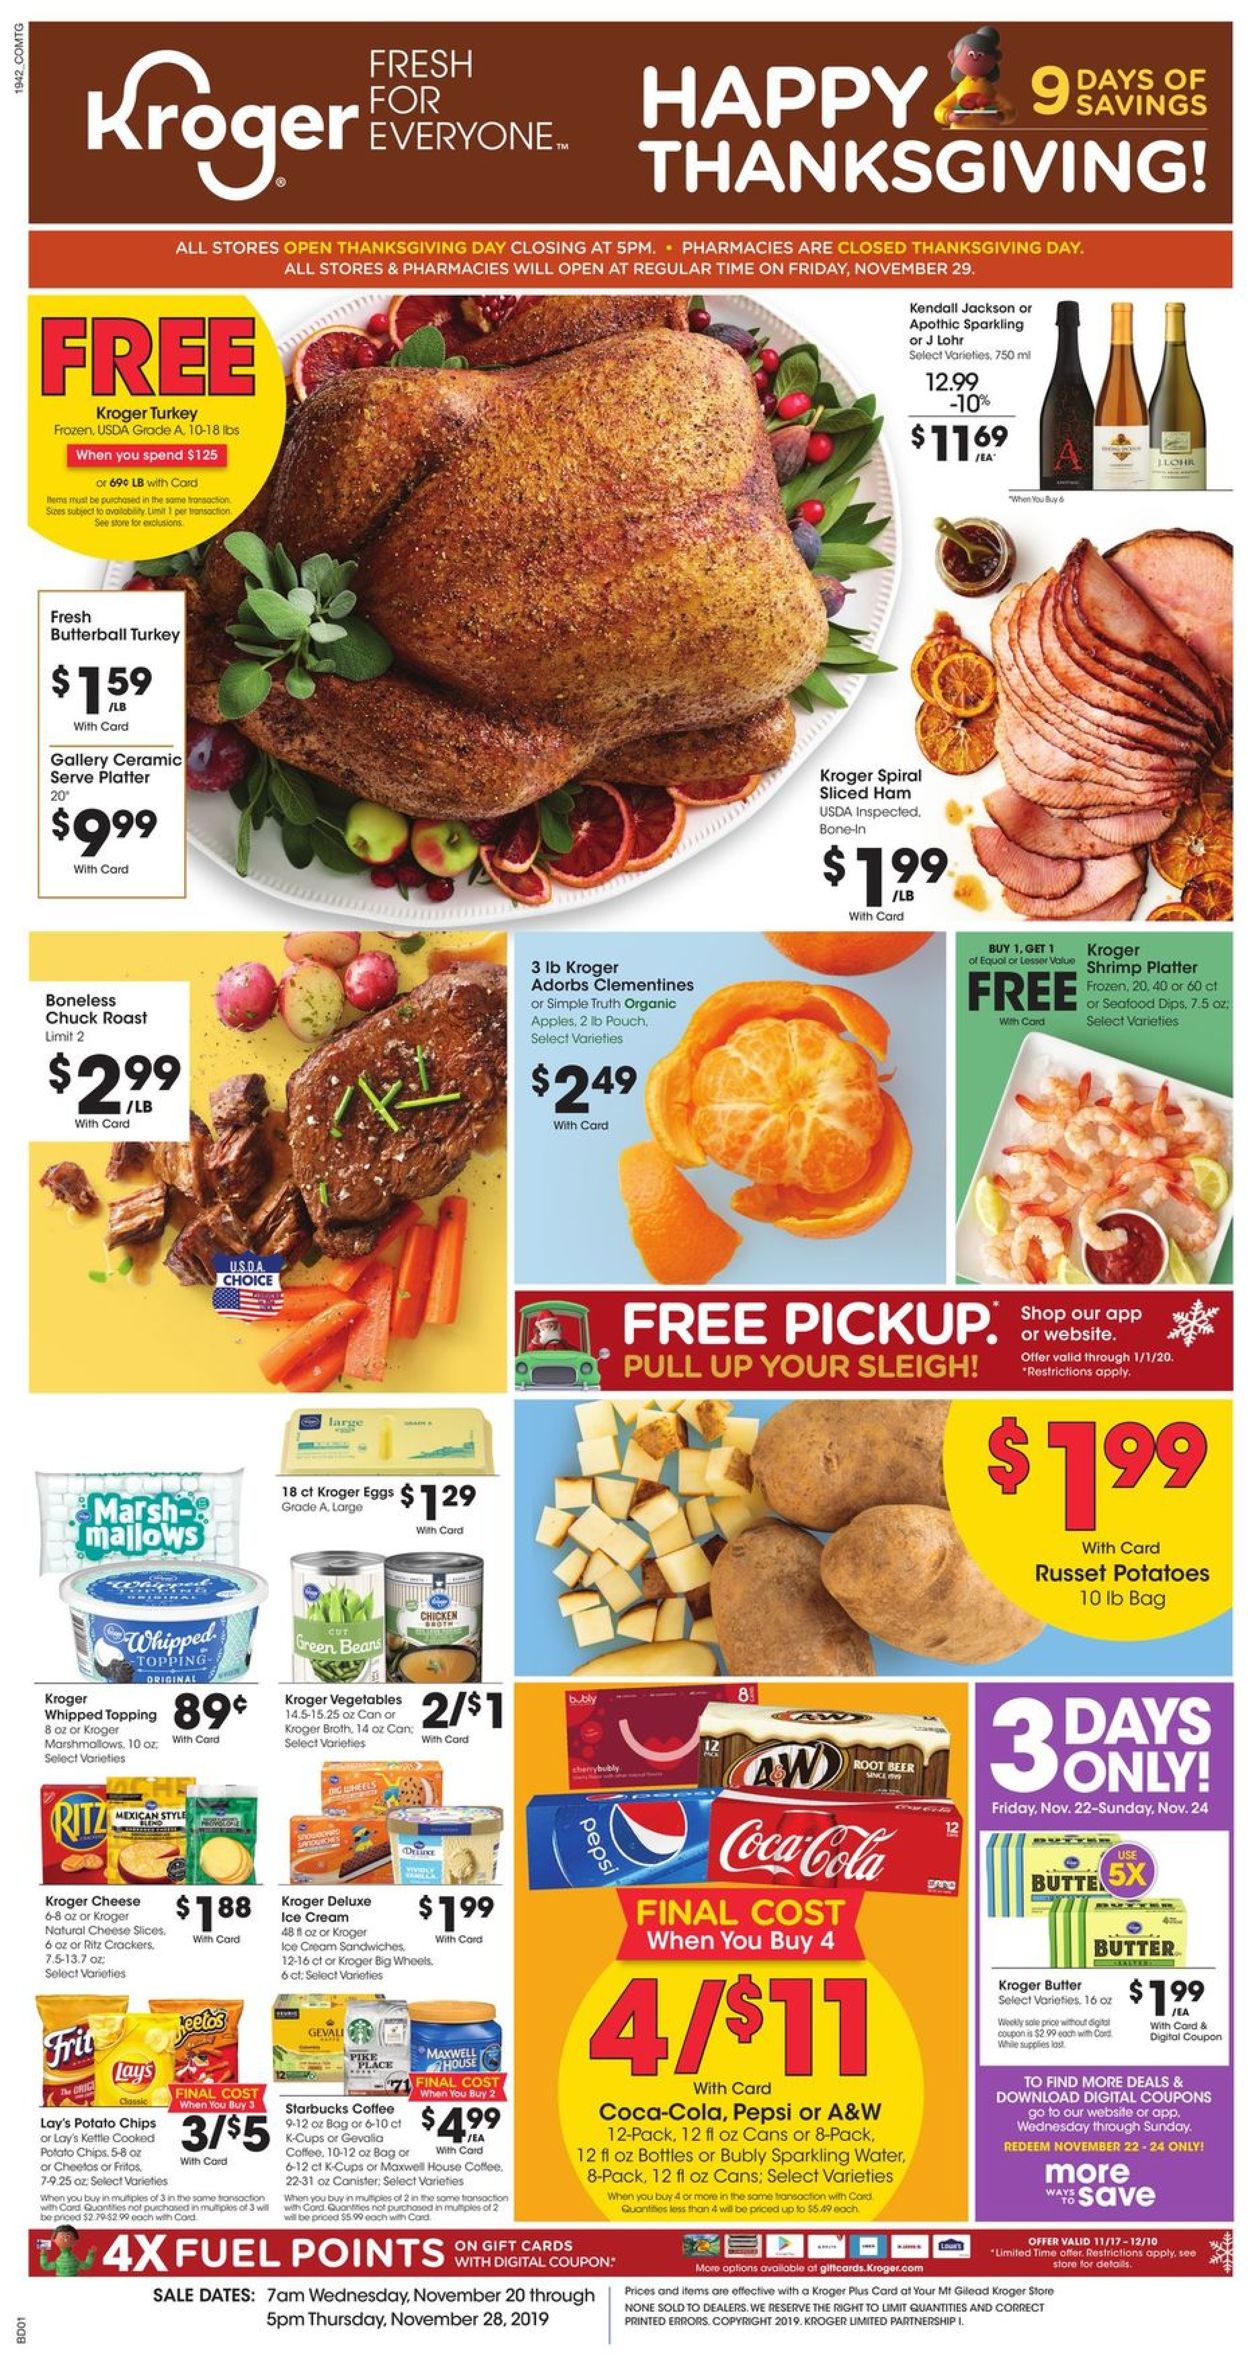 Kroger - Thanksgiving Ad 2019 Current weekly ad 11/20 - 11/28/2019